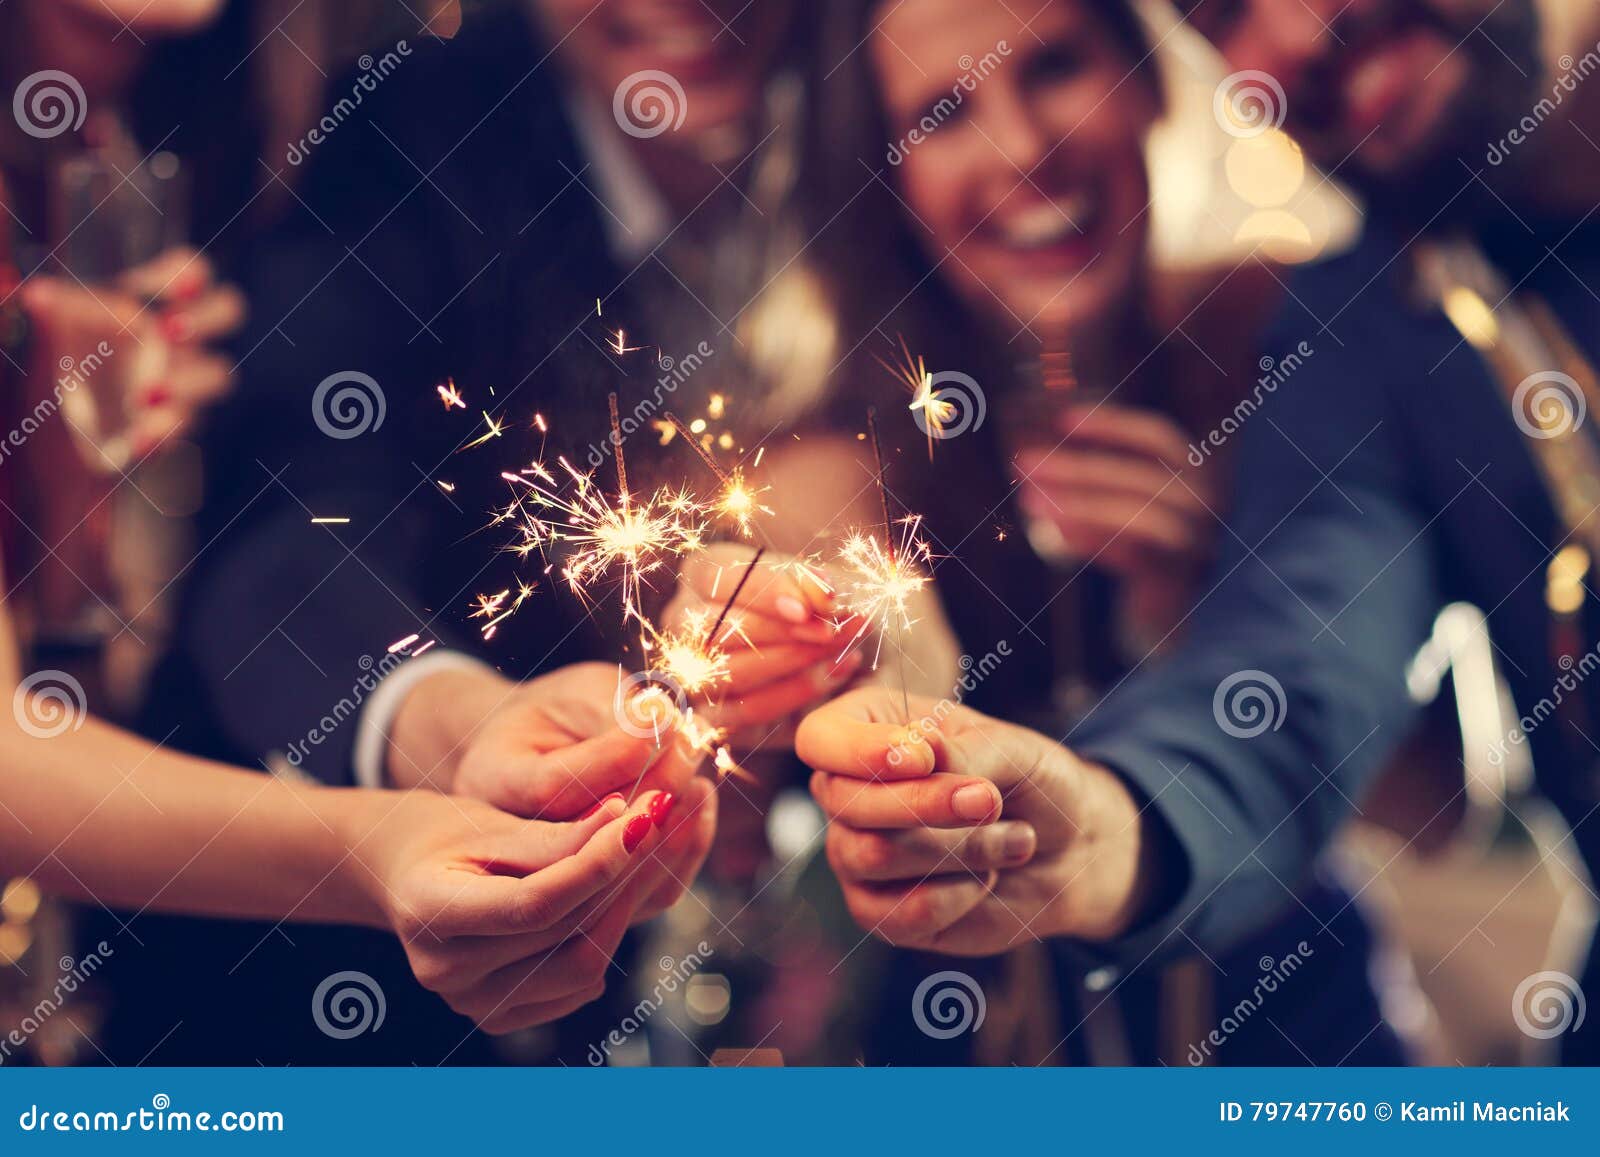 group of friends having fun with sparklers